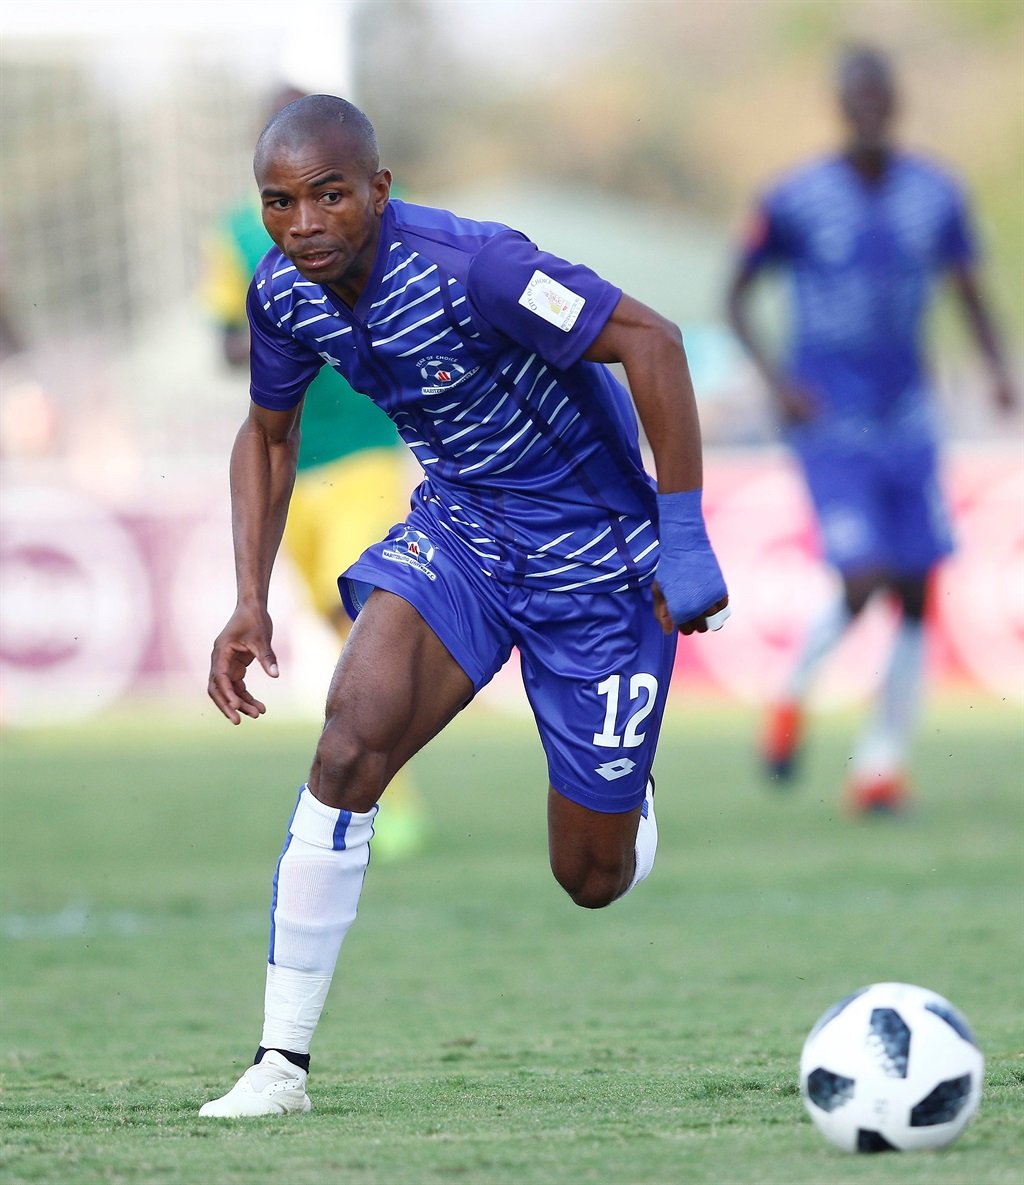 DURBAN, SOUTH AFRICA - AUGUST 04:  Gabriel Nyoni  of Maritzburg United during the Absa Premiership match between Golden Arrows and Maritzburg at Sugar Ray Xulu Stadium on August 04, 2019 in Durban, South Africa. (Photo by Anesh Debiky/Gallo Images)